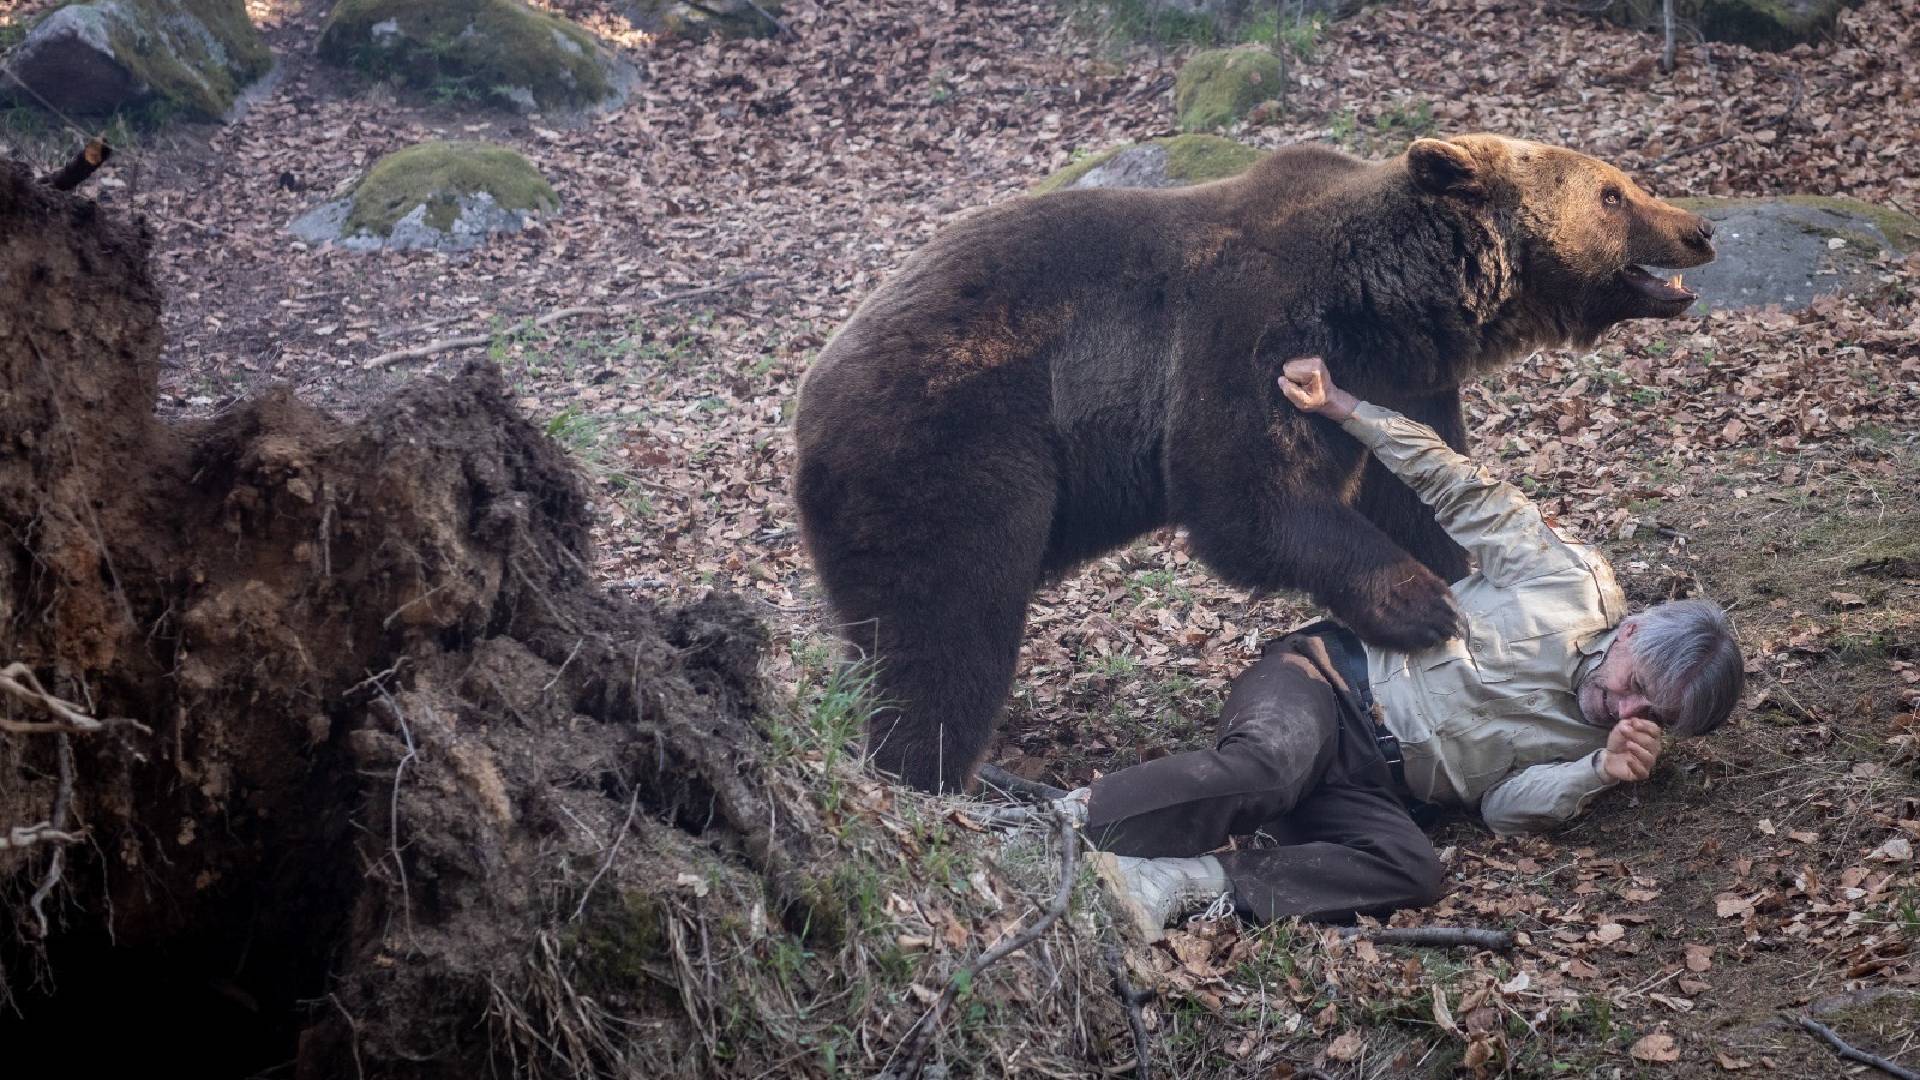  Thought The Revenant's bear attack scene was bad? An upcoming thriller is using a real grizzly in the movie 